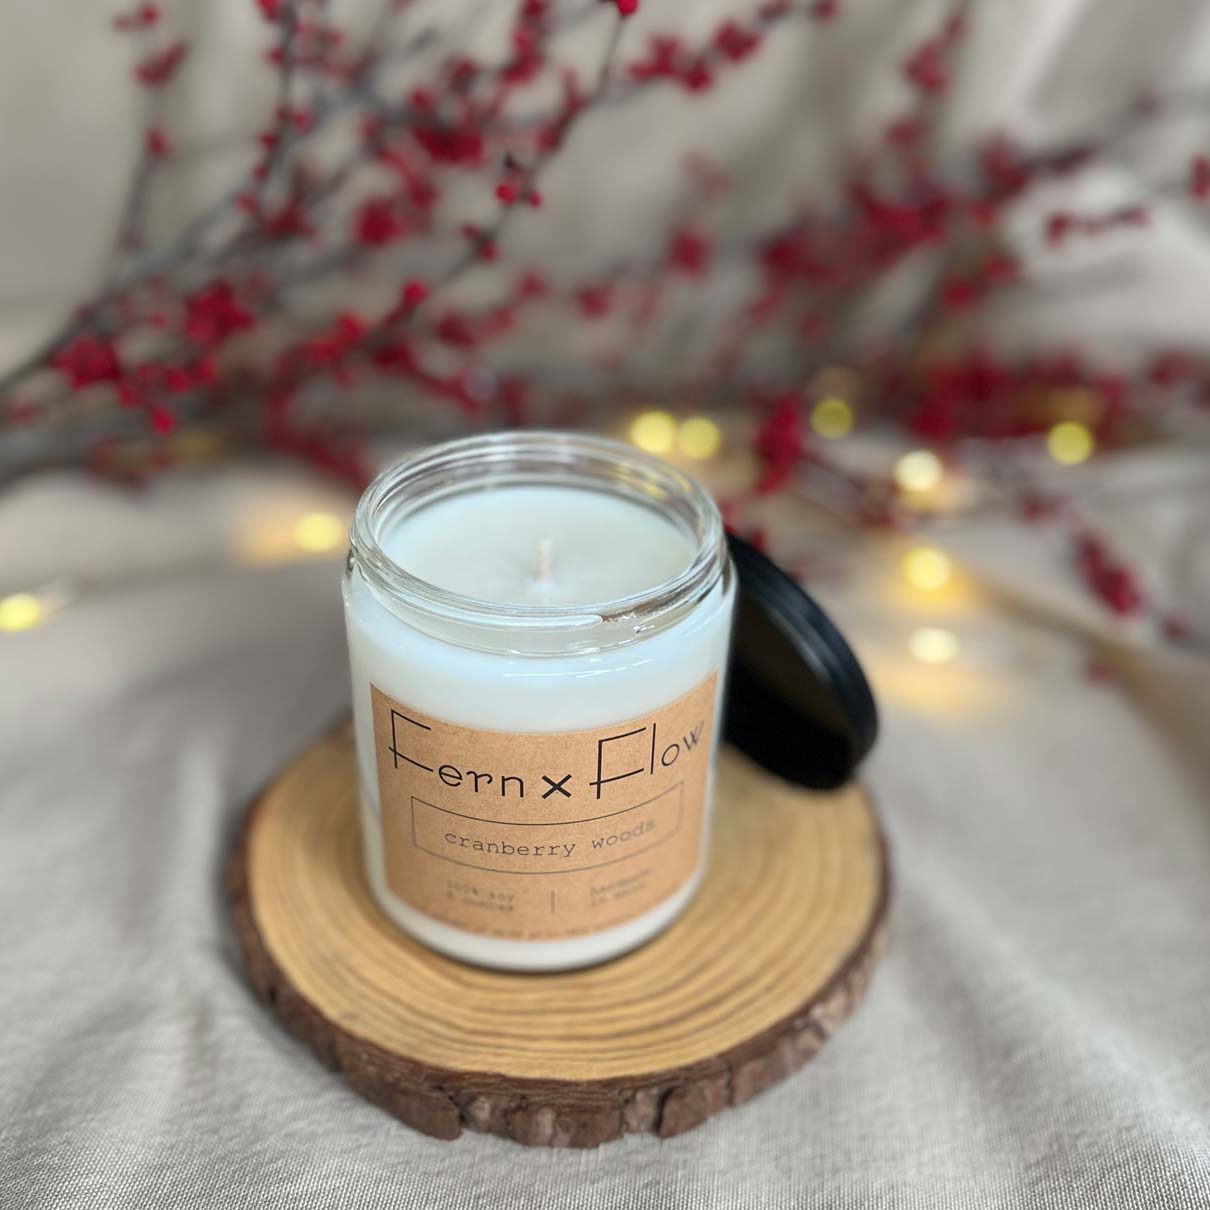 Fern x Flow Cranberry Woods scented soy candle on a rustic wooden riser with red berries and white lights out of focus in the background.